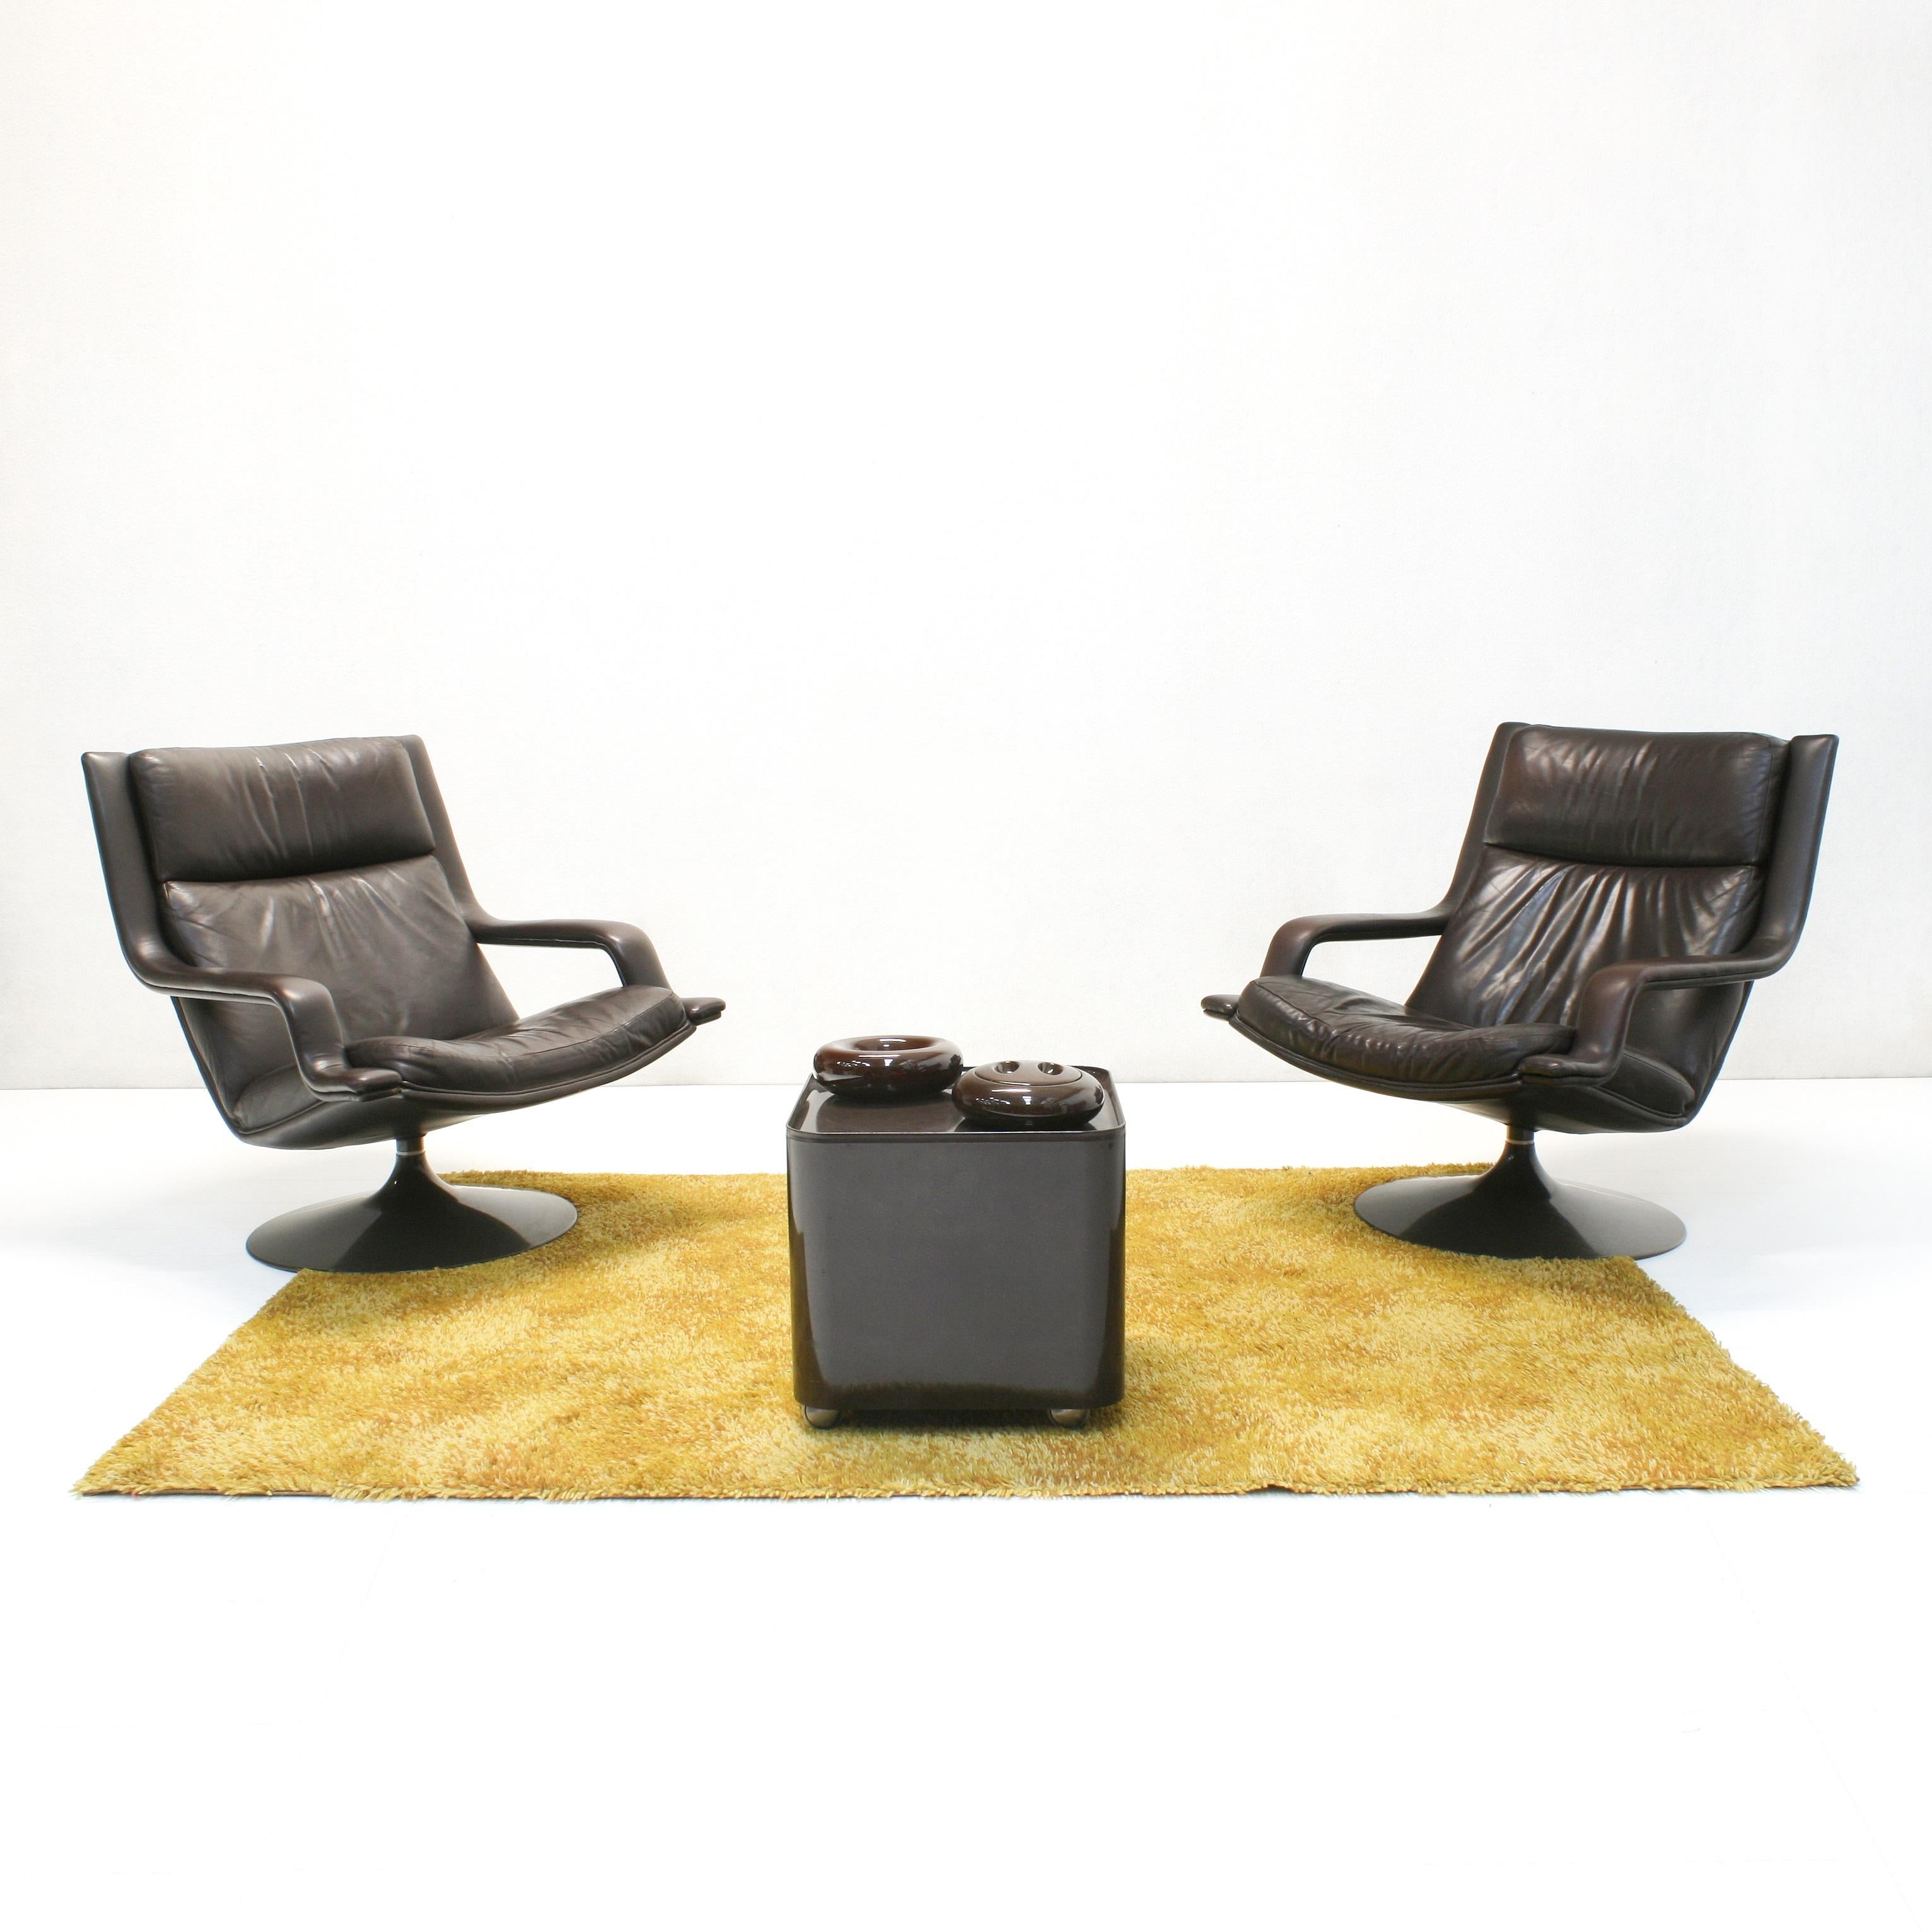 Great set of lounge chairs by Geoffrey David Harcourt, designed for Artifort. These armchairs, upholstered in a brown leather on a plastic swivel base date from the 1970s and are in a good vintage condition with mild patina.